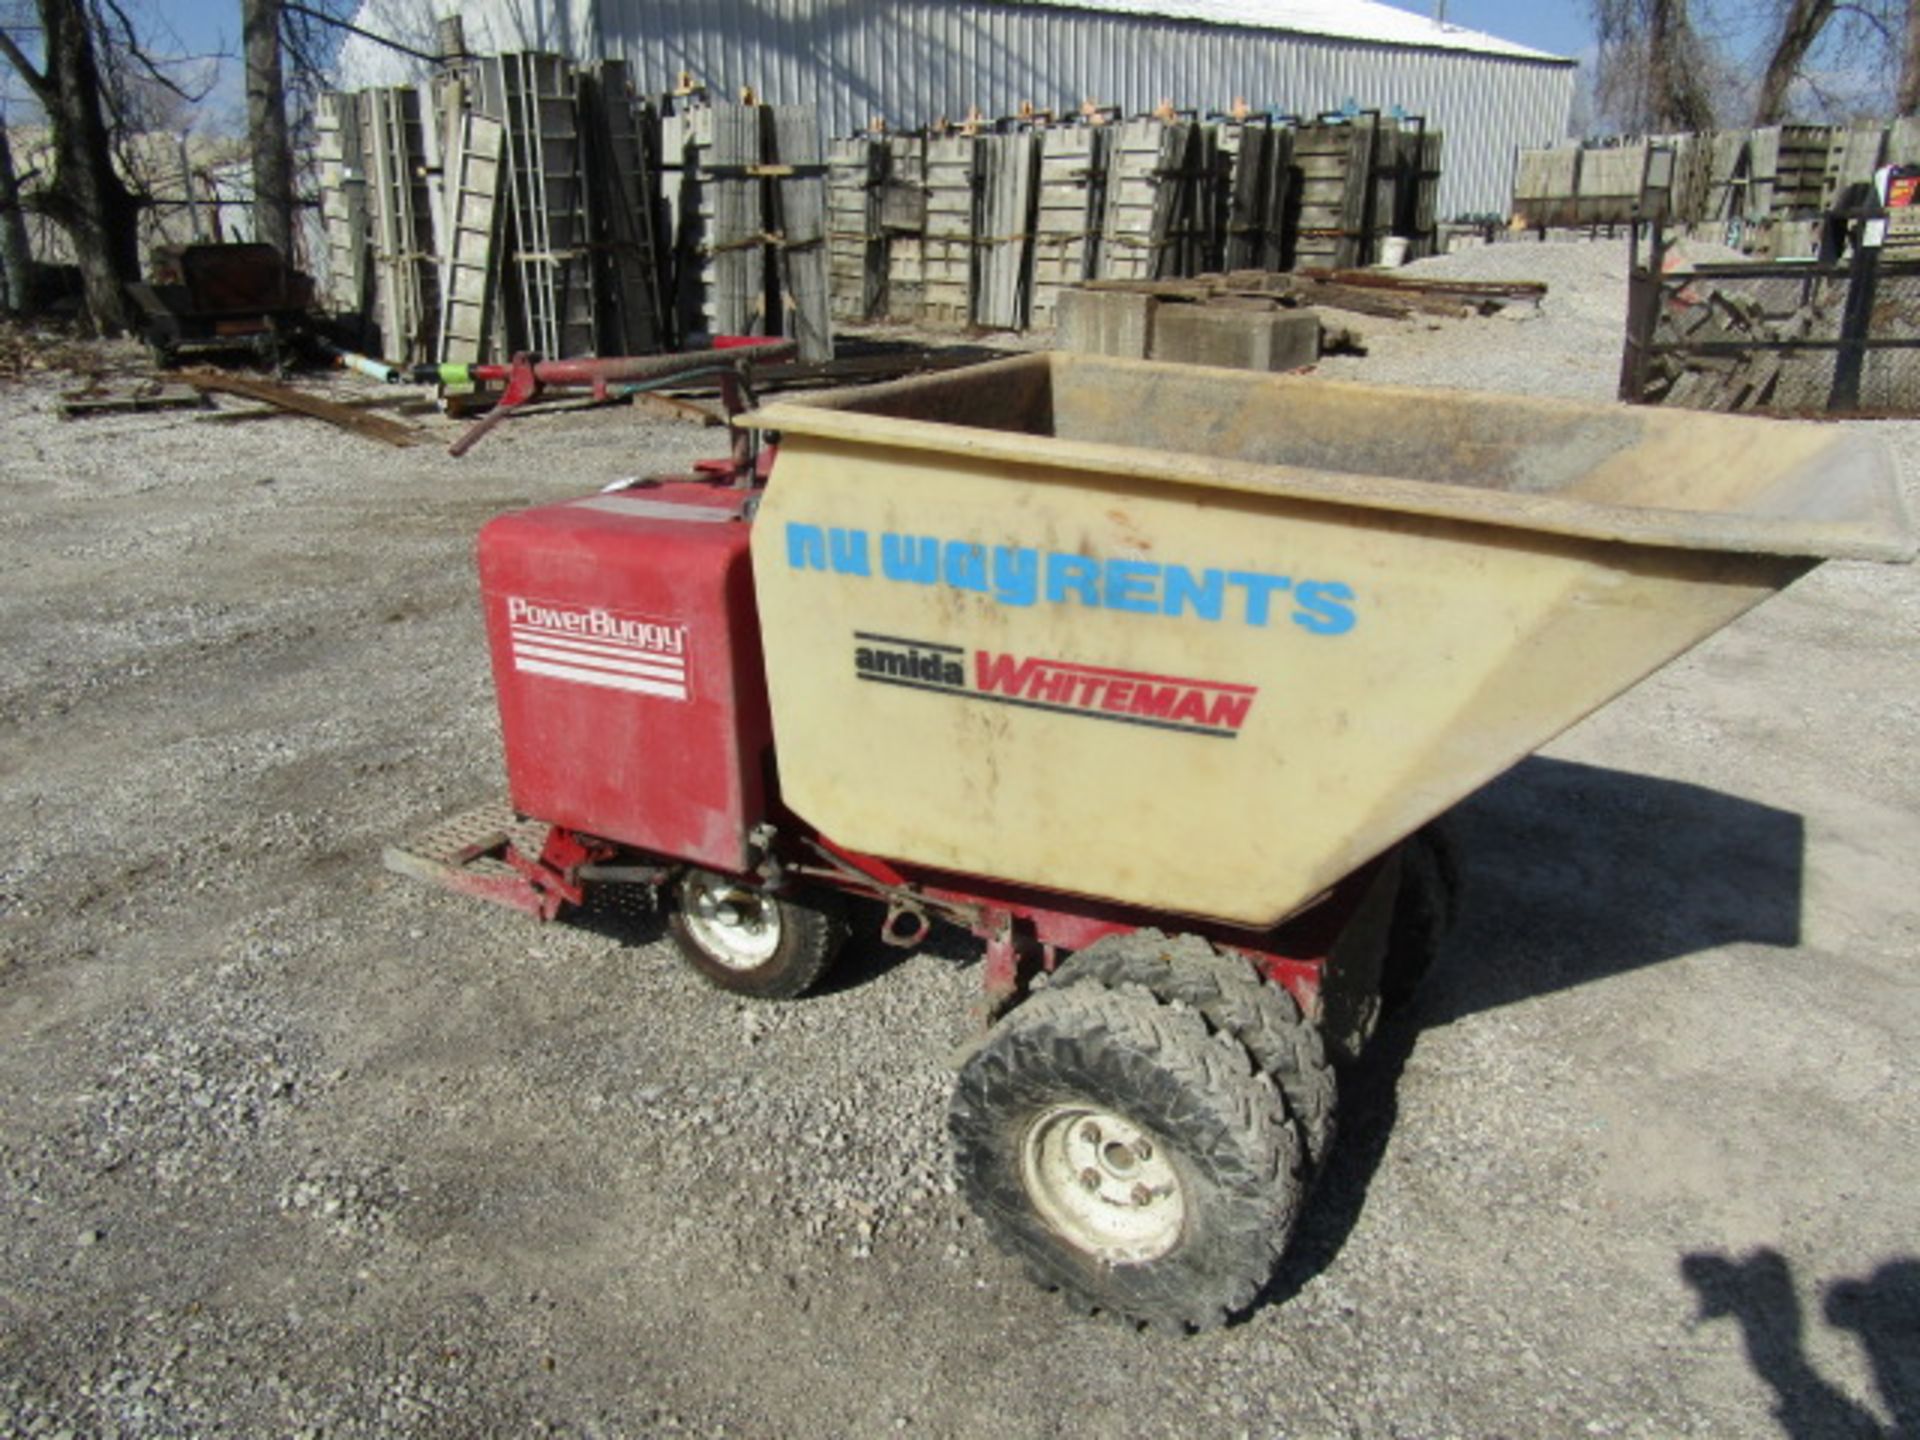 Whiteman Power Concrete Buggy, Model # OWAPB16R, Serial # 9606-36070, Located in Wildwood, MO